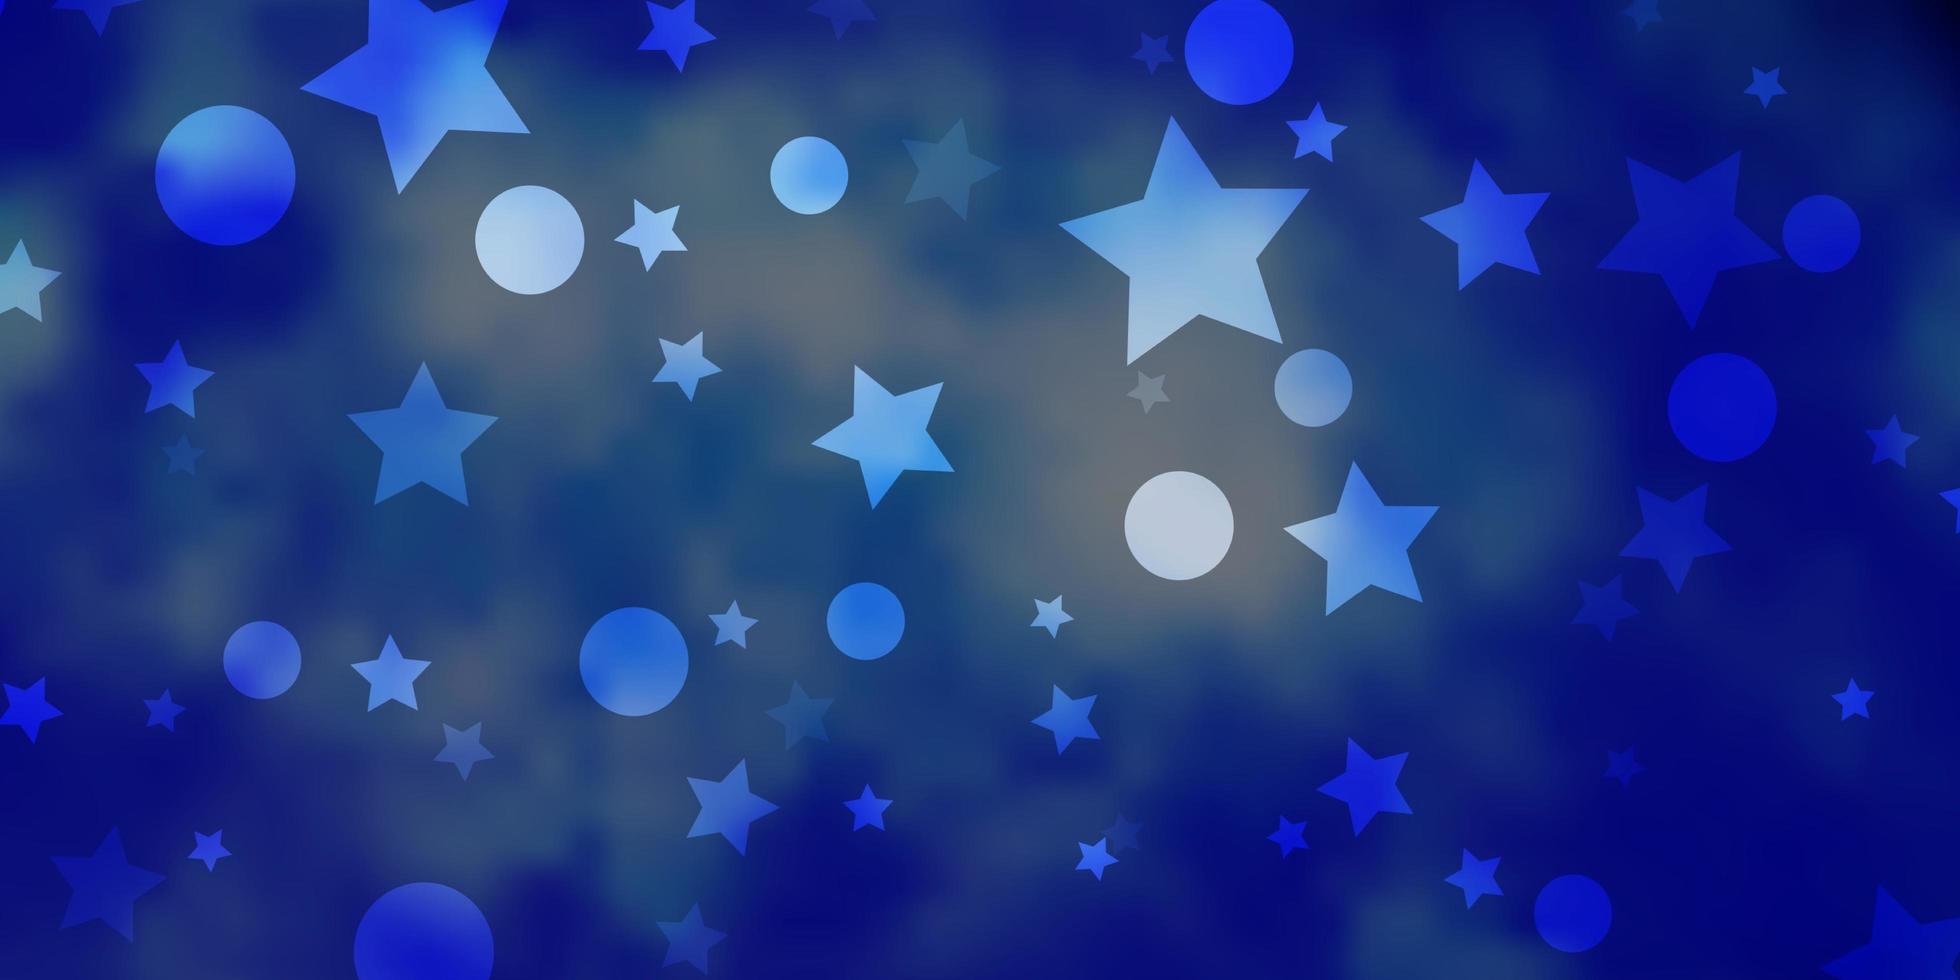 Light BLUE vector pattern with circles stars Abstract design in gradient style with bubbles stars Design for wallpaper fabric makers